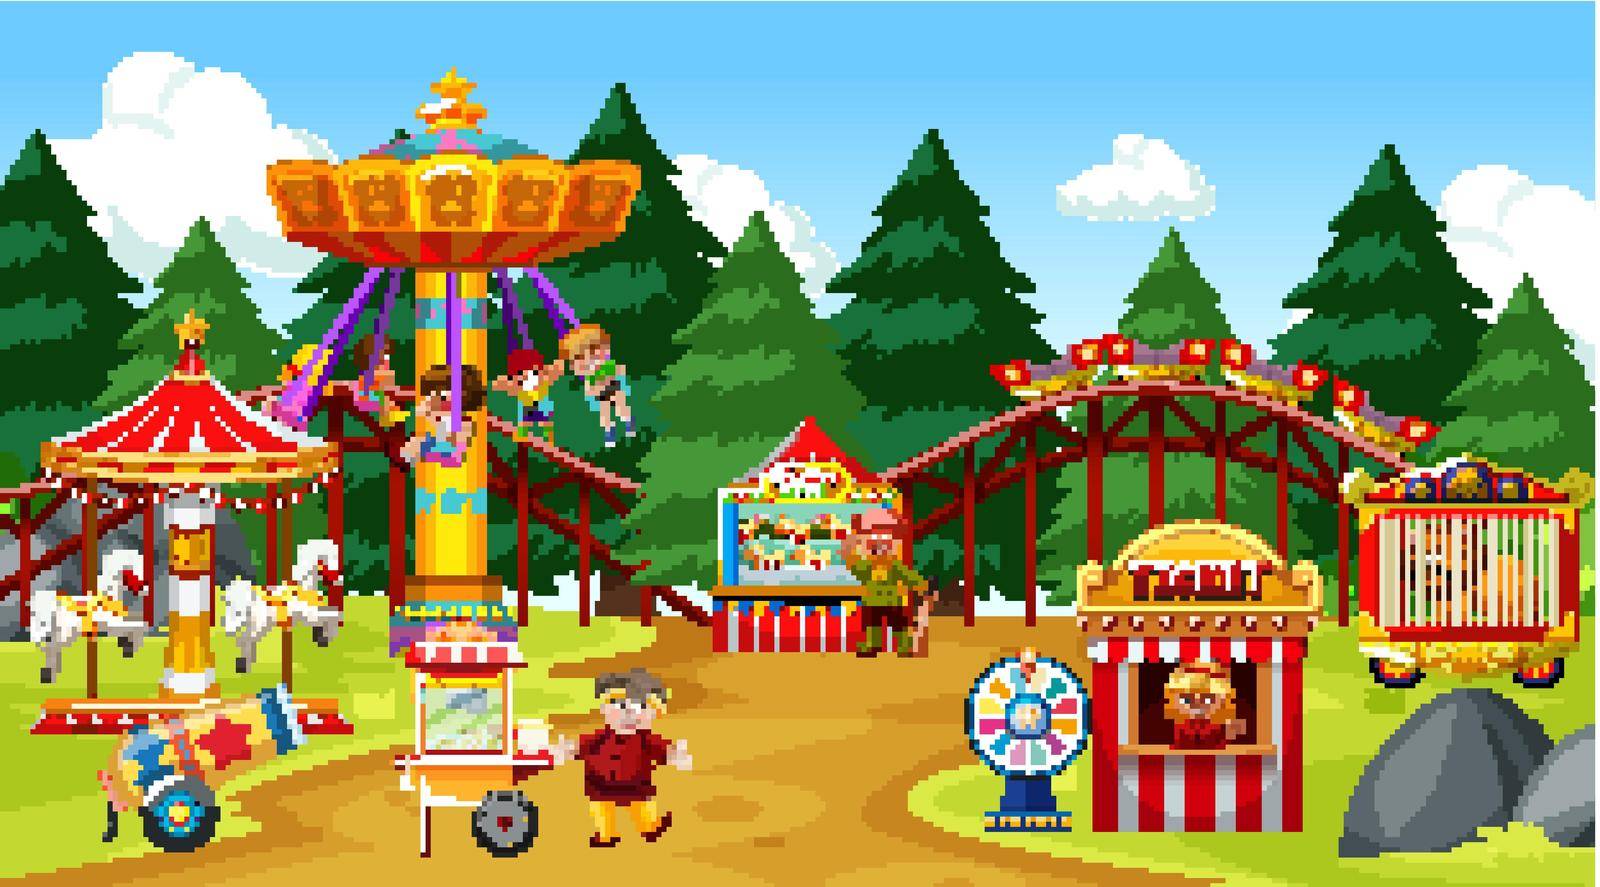 Themepark scene with many rides and many people illustration